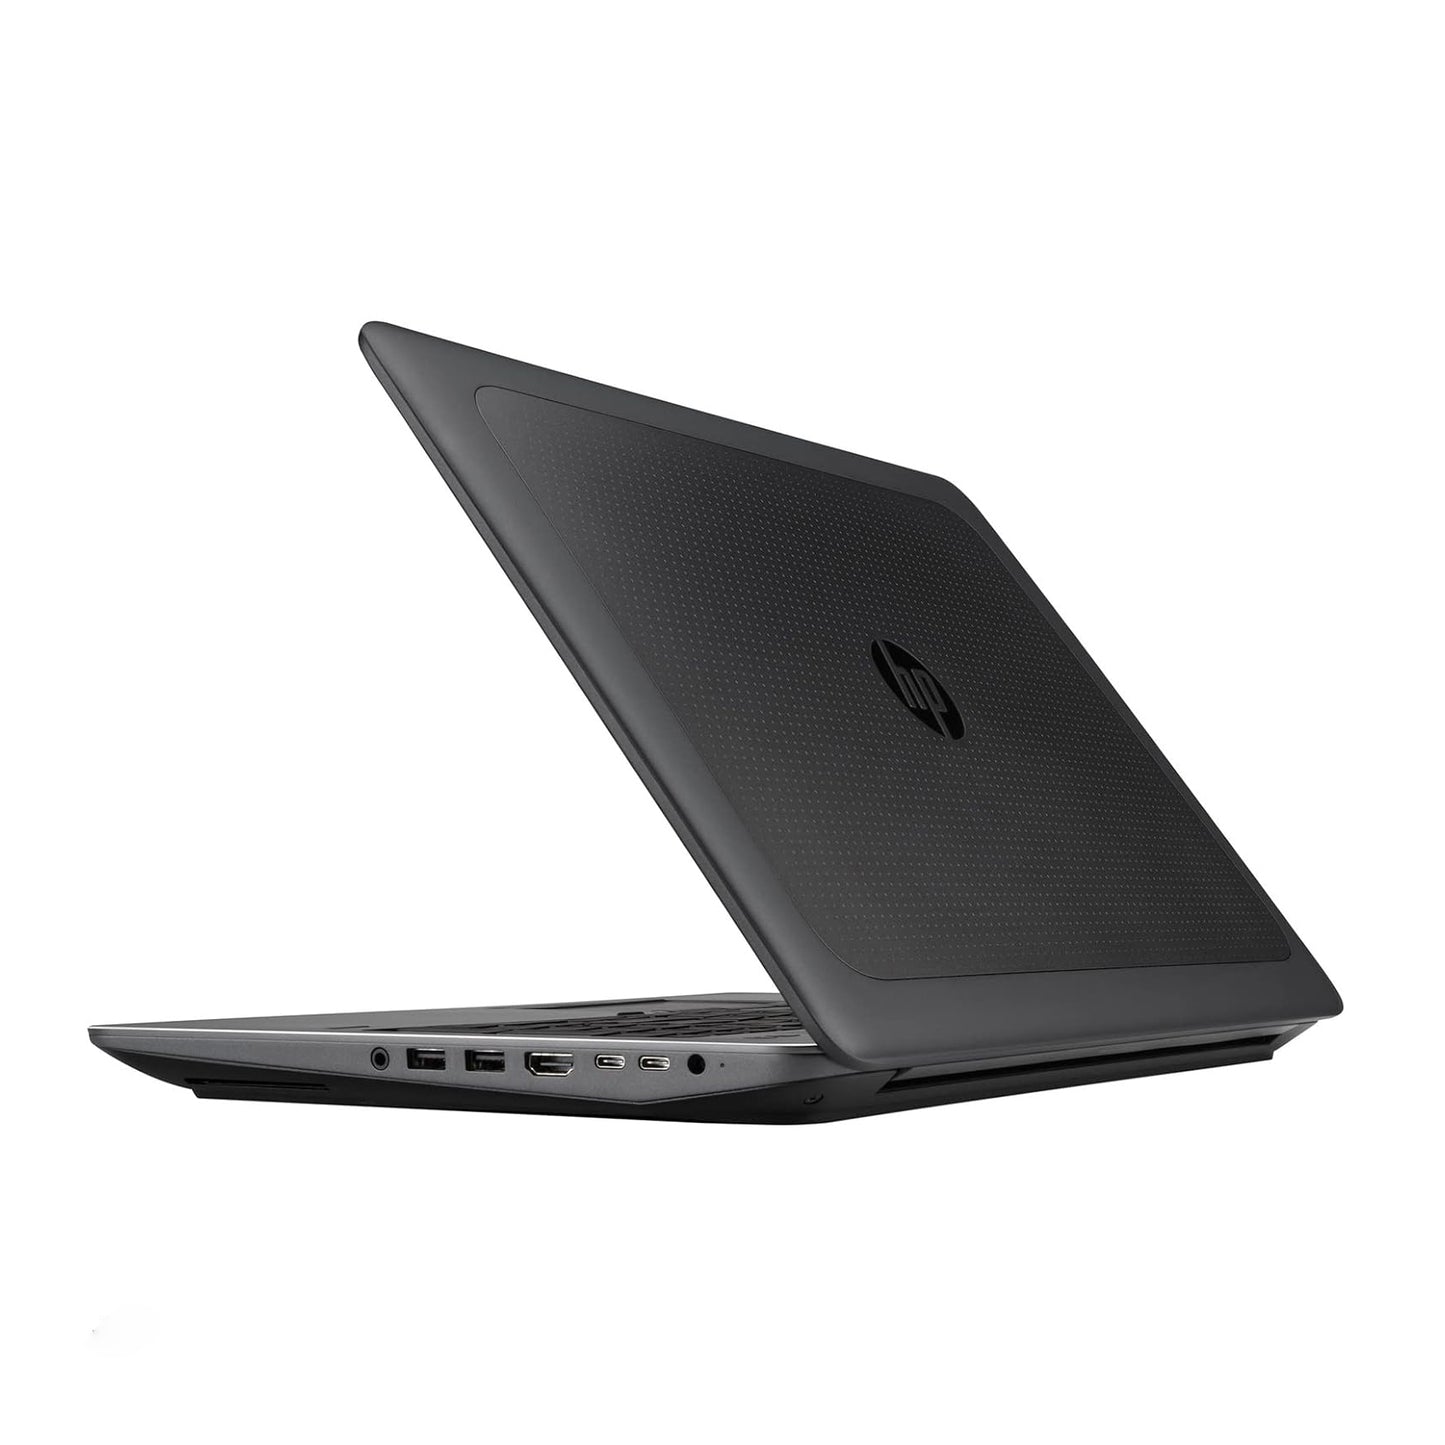 Hp Zbook 15 Core i5-6440hq 15.6" Truecolor Mobile Workstation Laptop Offers (Open Box)